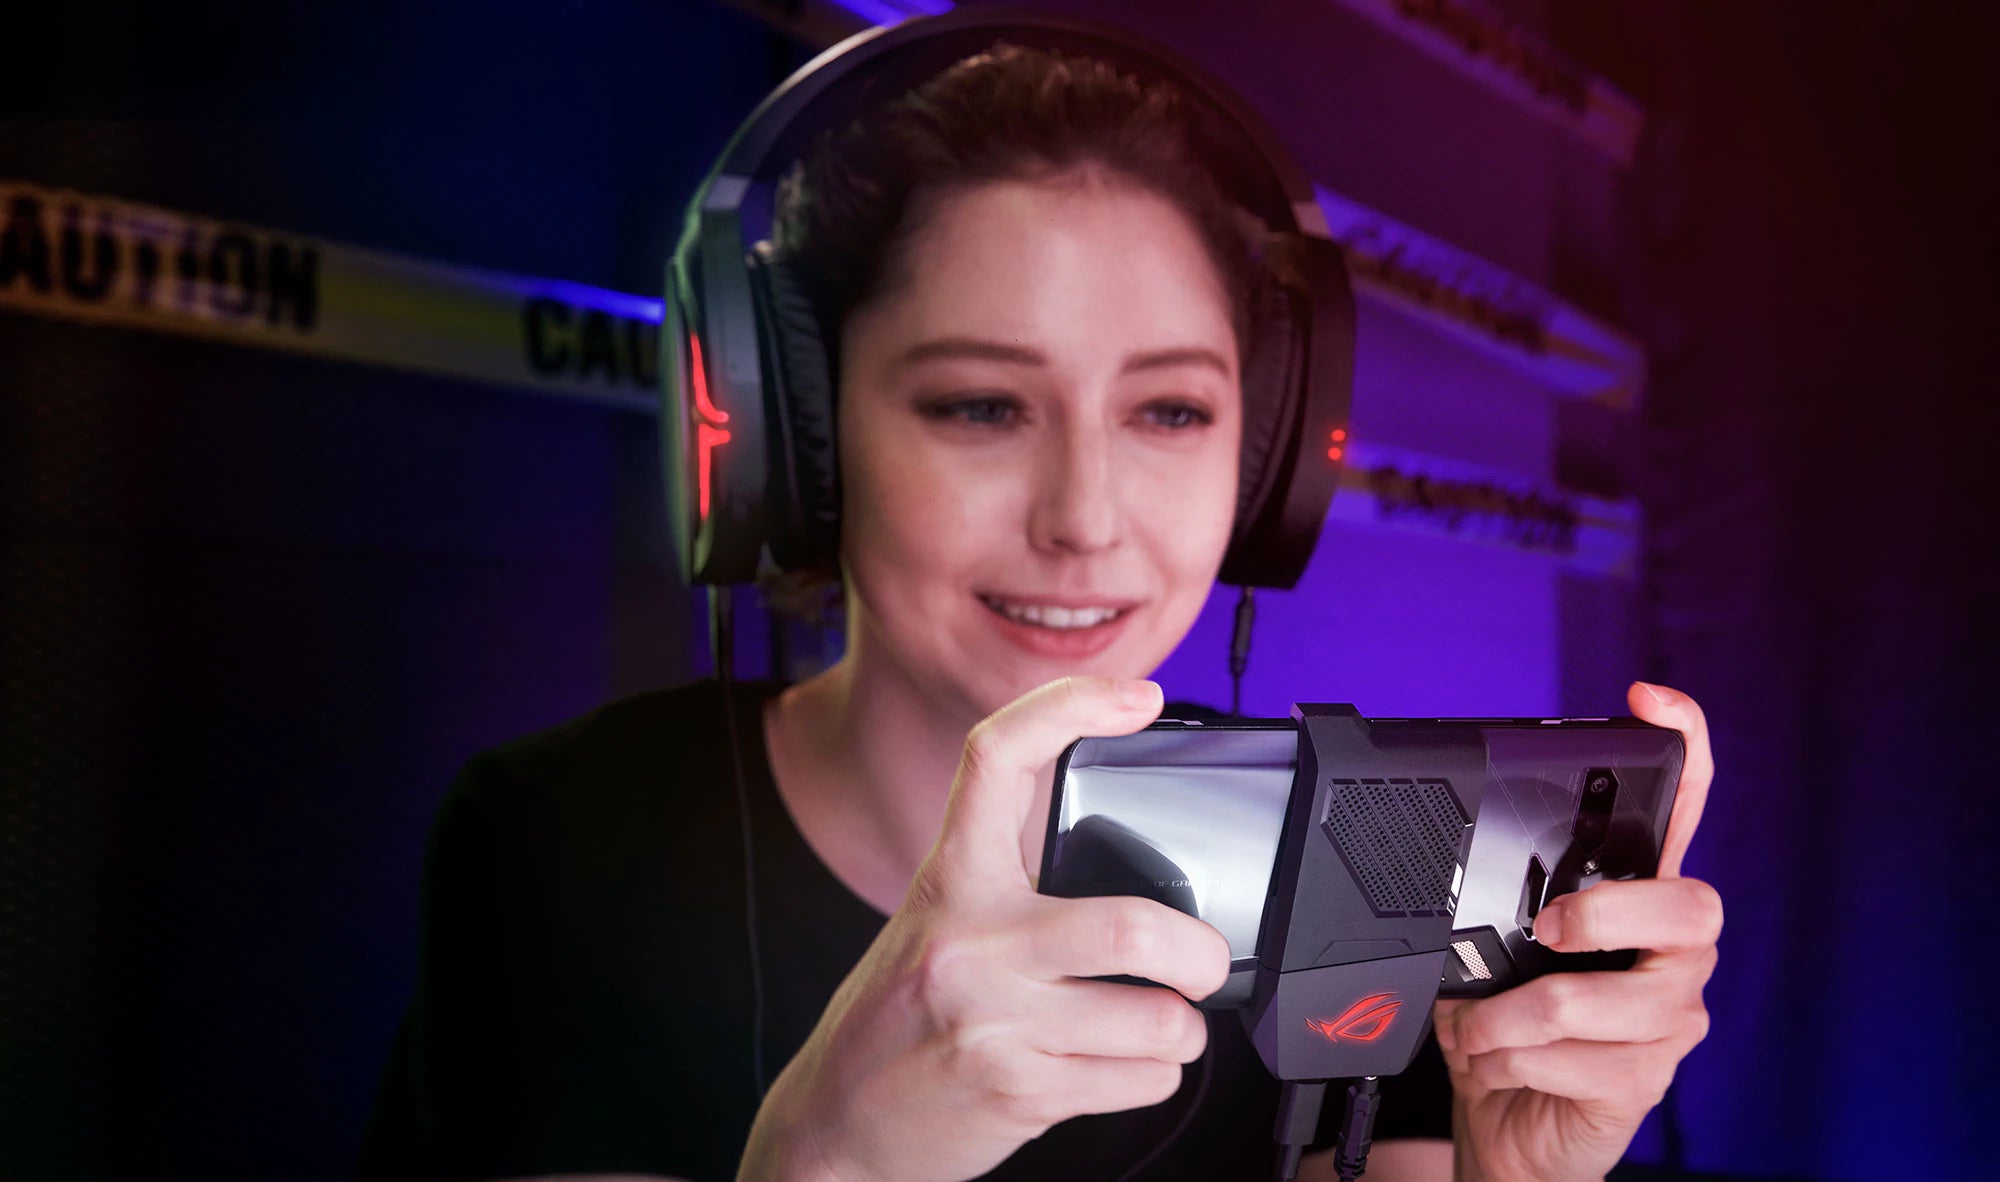 The Asus ROG Phone is announced: it's meant to make headshots, but it aims at gamers' hearts